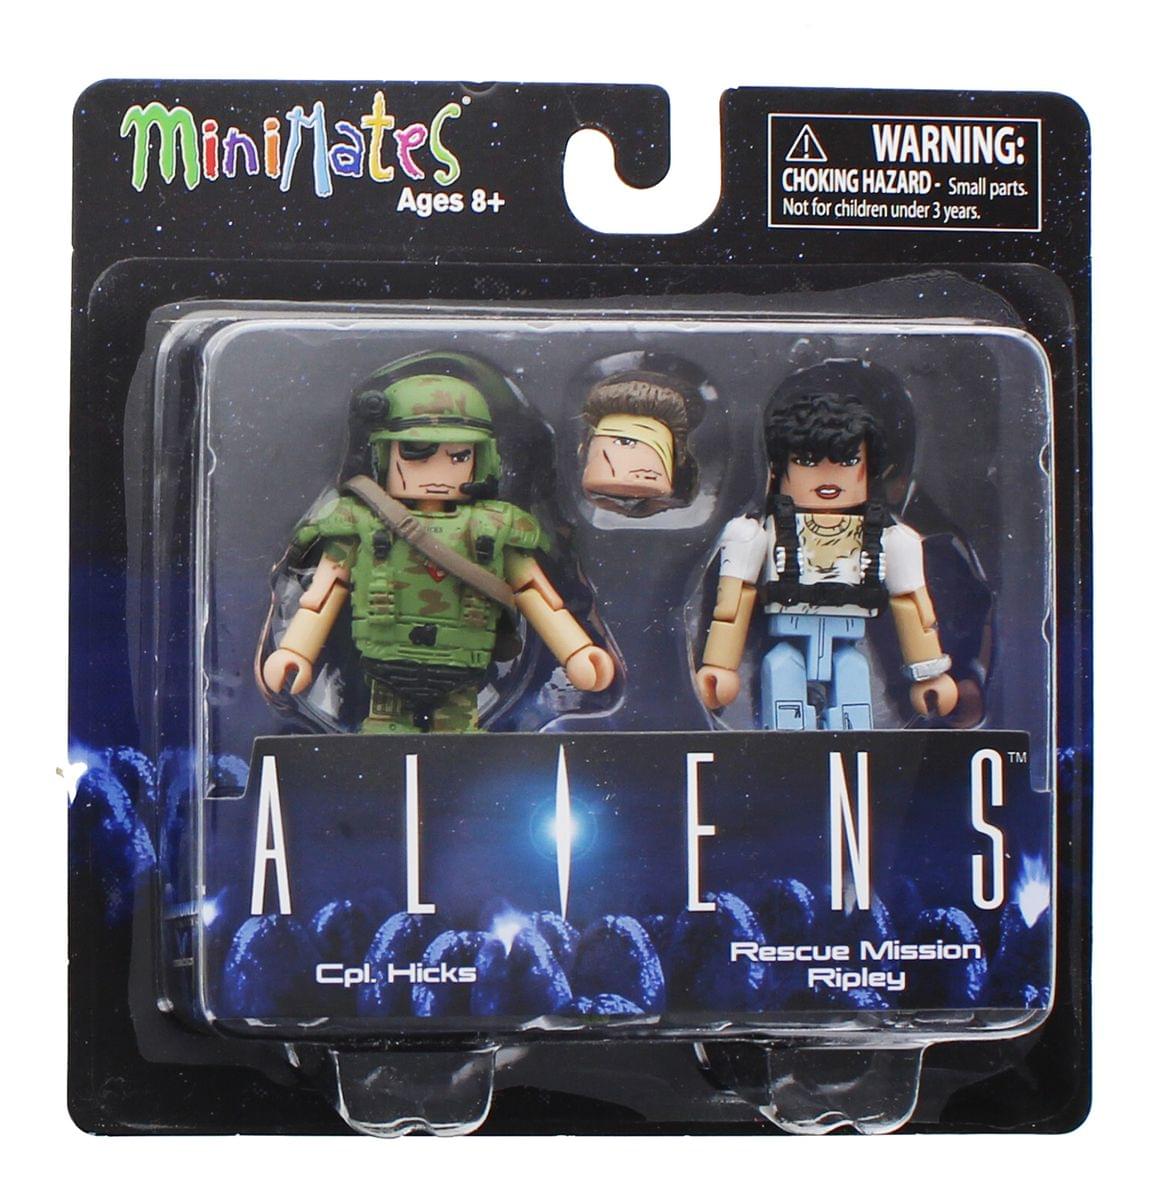 Aliens Cpl. Hicks & Rescue Mission Ripley 2-Pack Series 1 Minimates